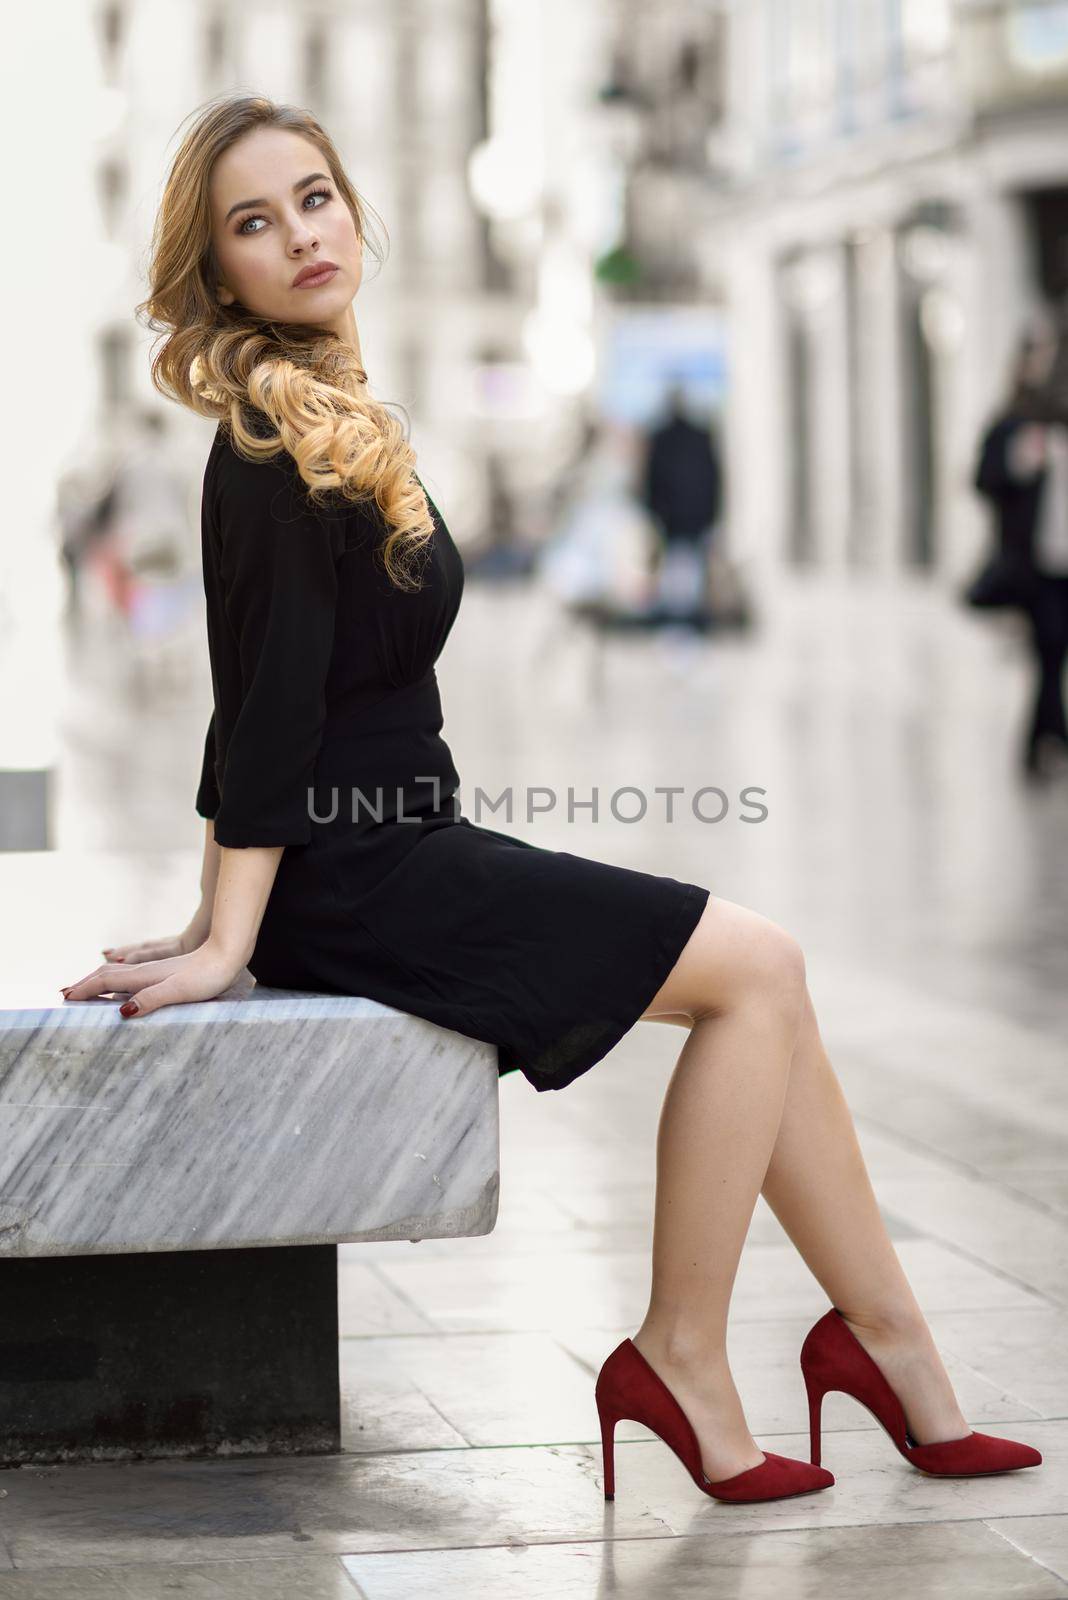 Blonde woman with beautiful legs in urban background. Beautiful young girl wearing black elegant dress and red high heels sitting on a bench in the street. Pretty russian female with long wavy hair hairstyle and blue eyes.